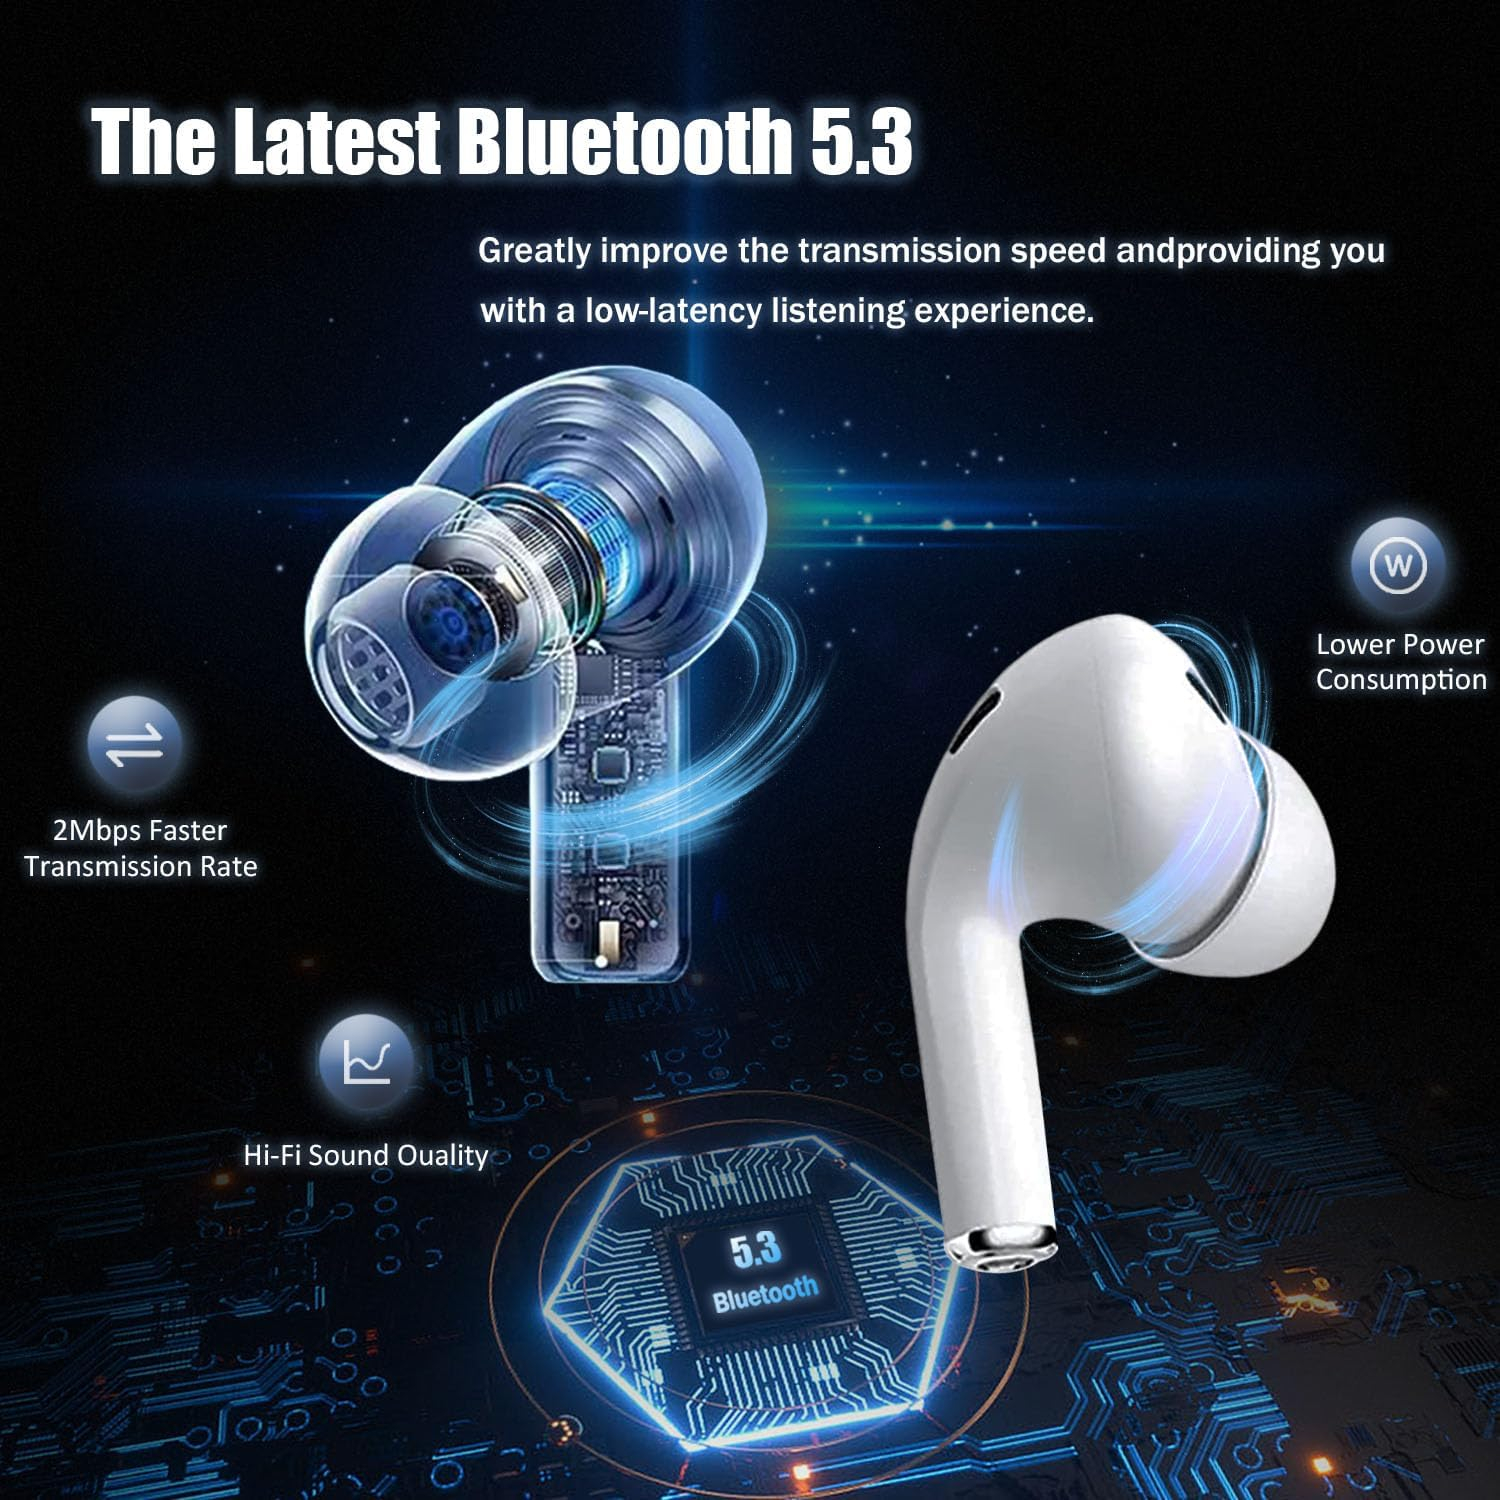 MGGZXR Wireless Earbuds Pro 2 Bluetooth 5.3 Headphones in Ear Buds Built in Noise Cancelling Mic with Charging Case,40Hrs Playtime IPX7 Waterproof,Bluetooth Earphones Stereo Sound for Androi (A5)